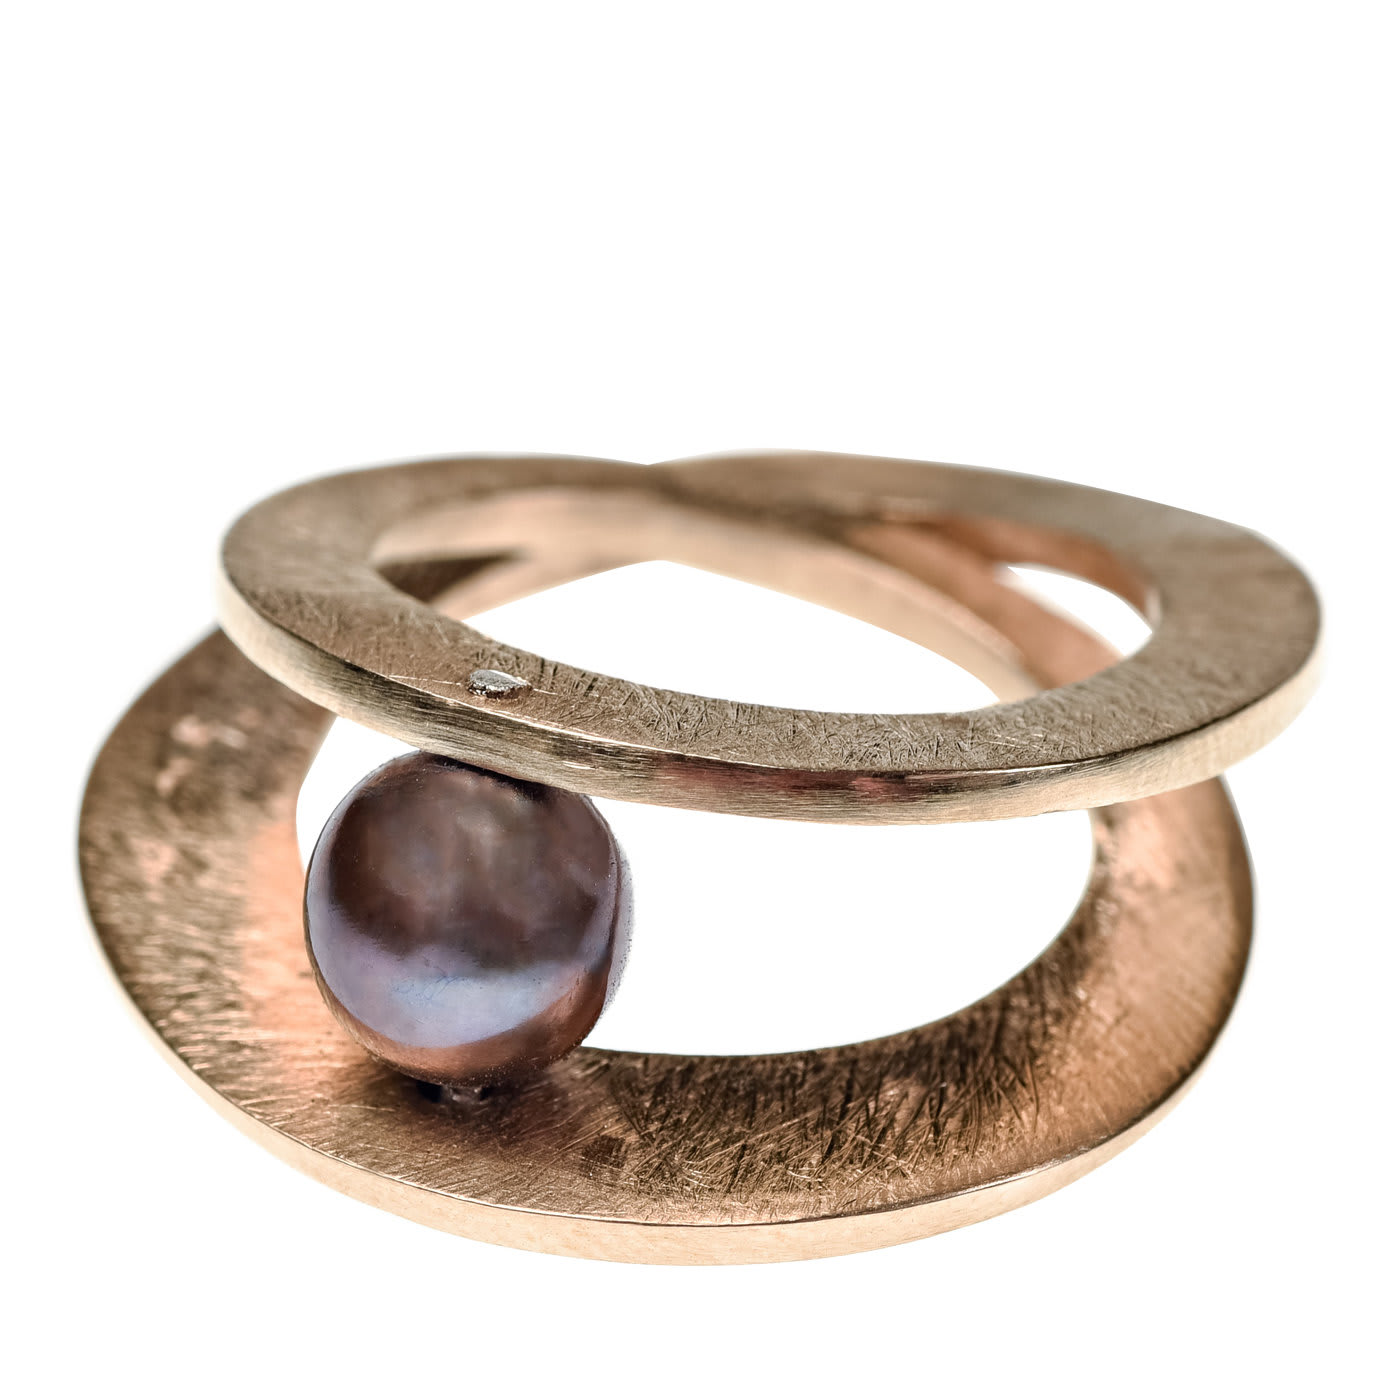 Jazz Bronze and Pearl Ring - Maria Paola Barrotta